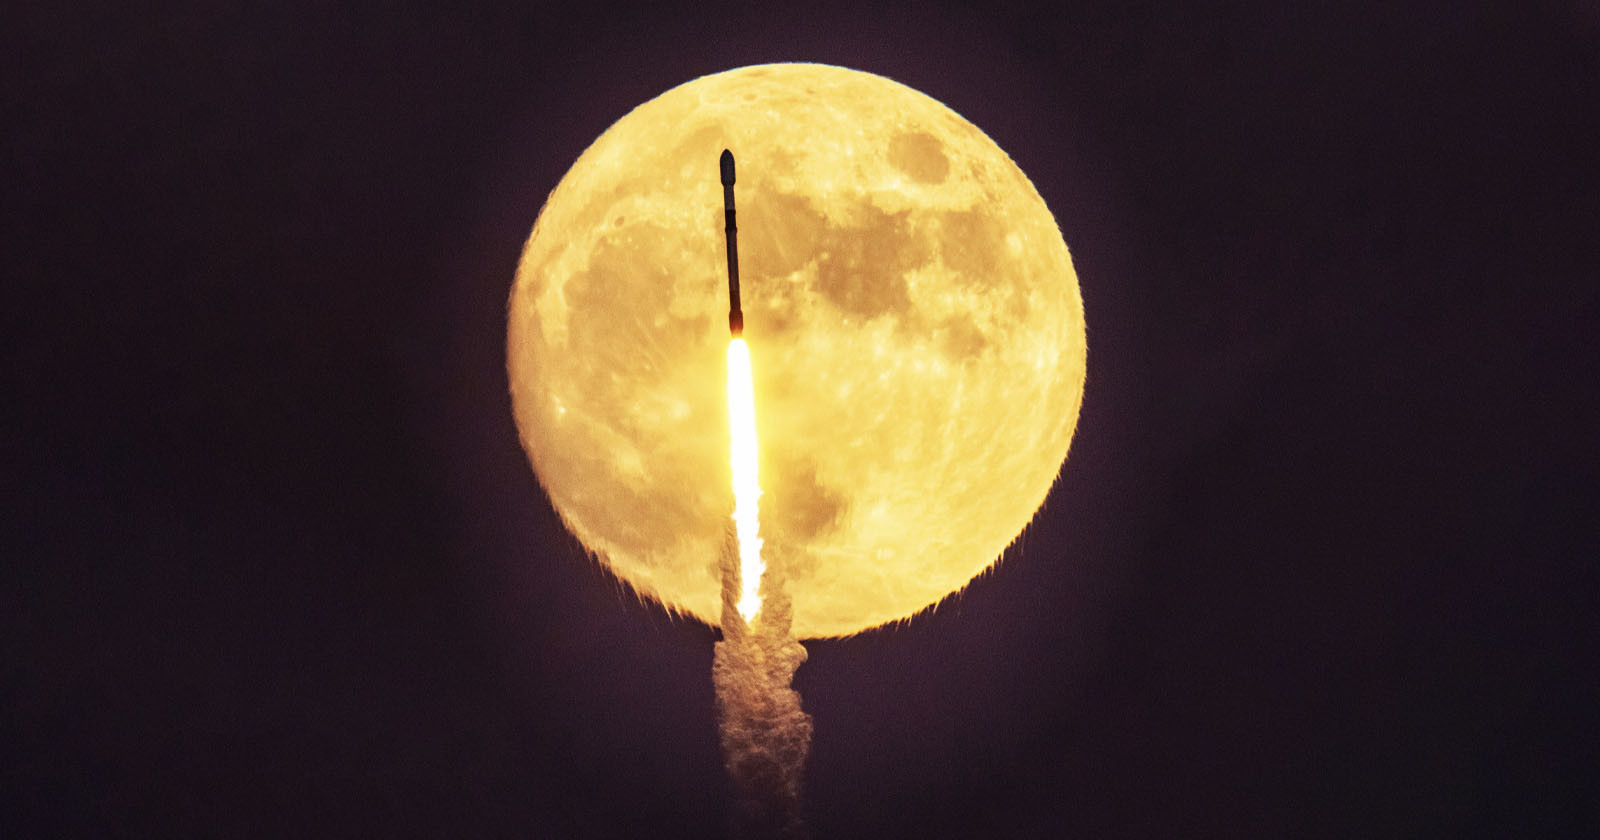  photographer captures spacex rocket firing front full moon 